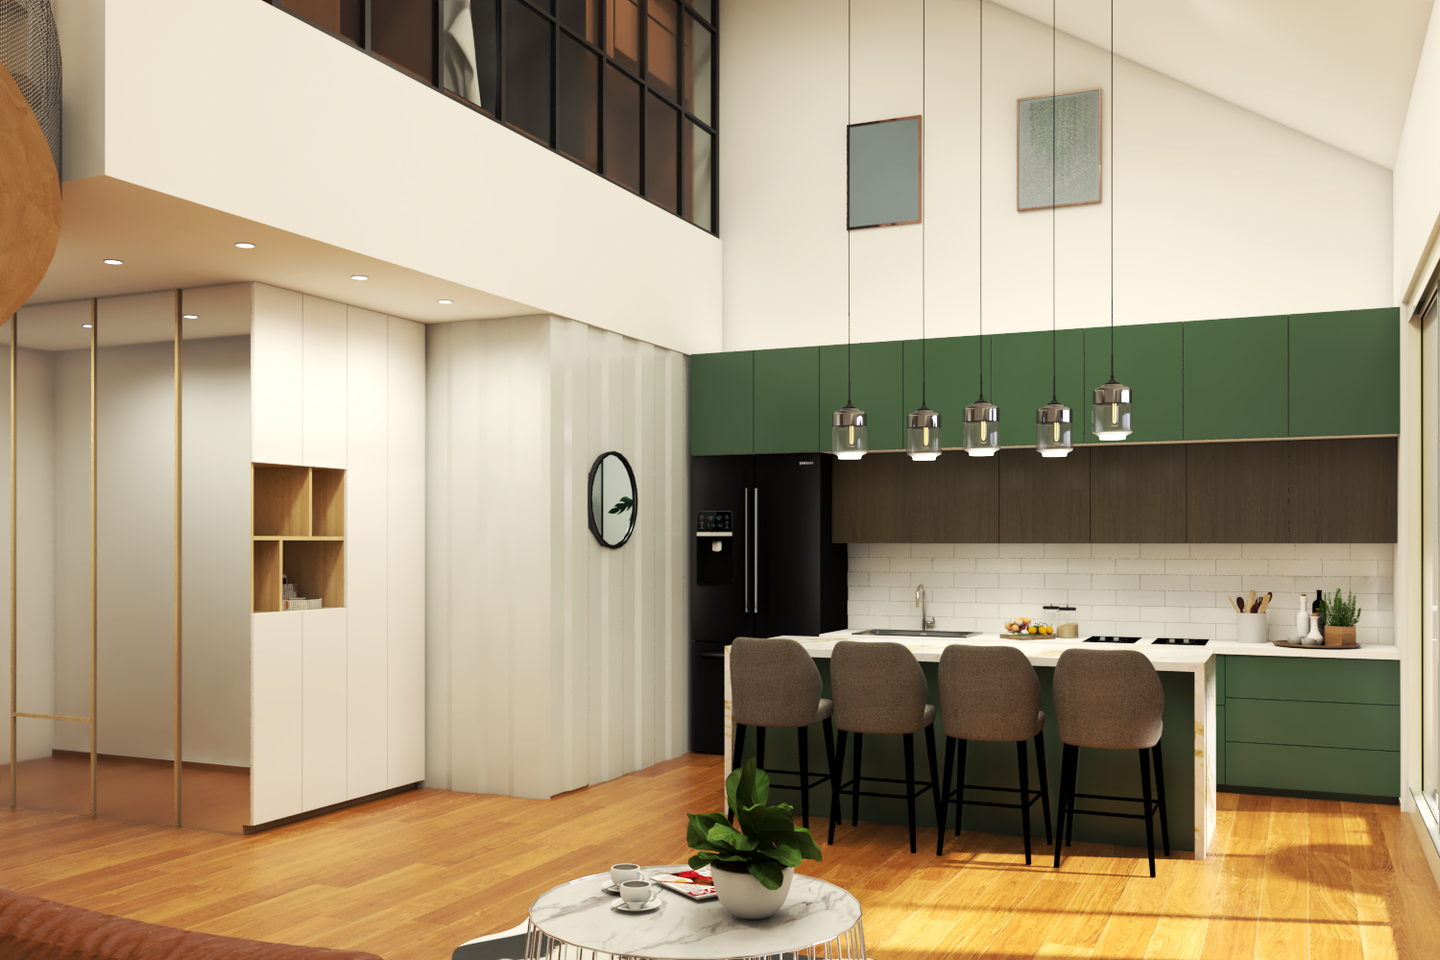 Modern Spacious Kitchen Design with Green Cabinets and Breakfast Island - Livspace